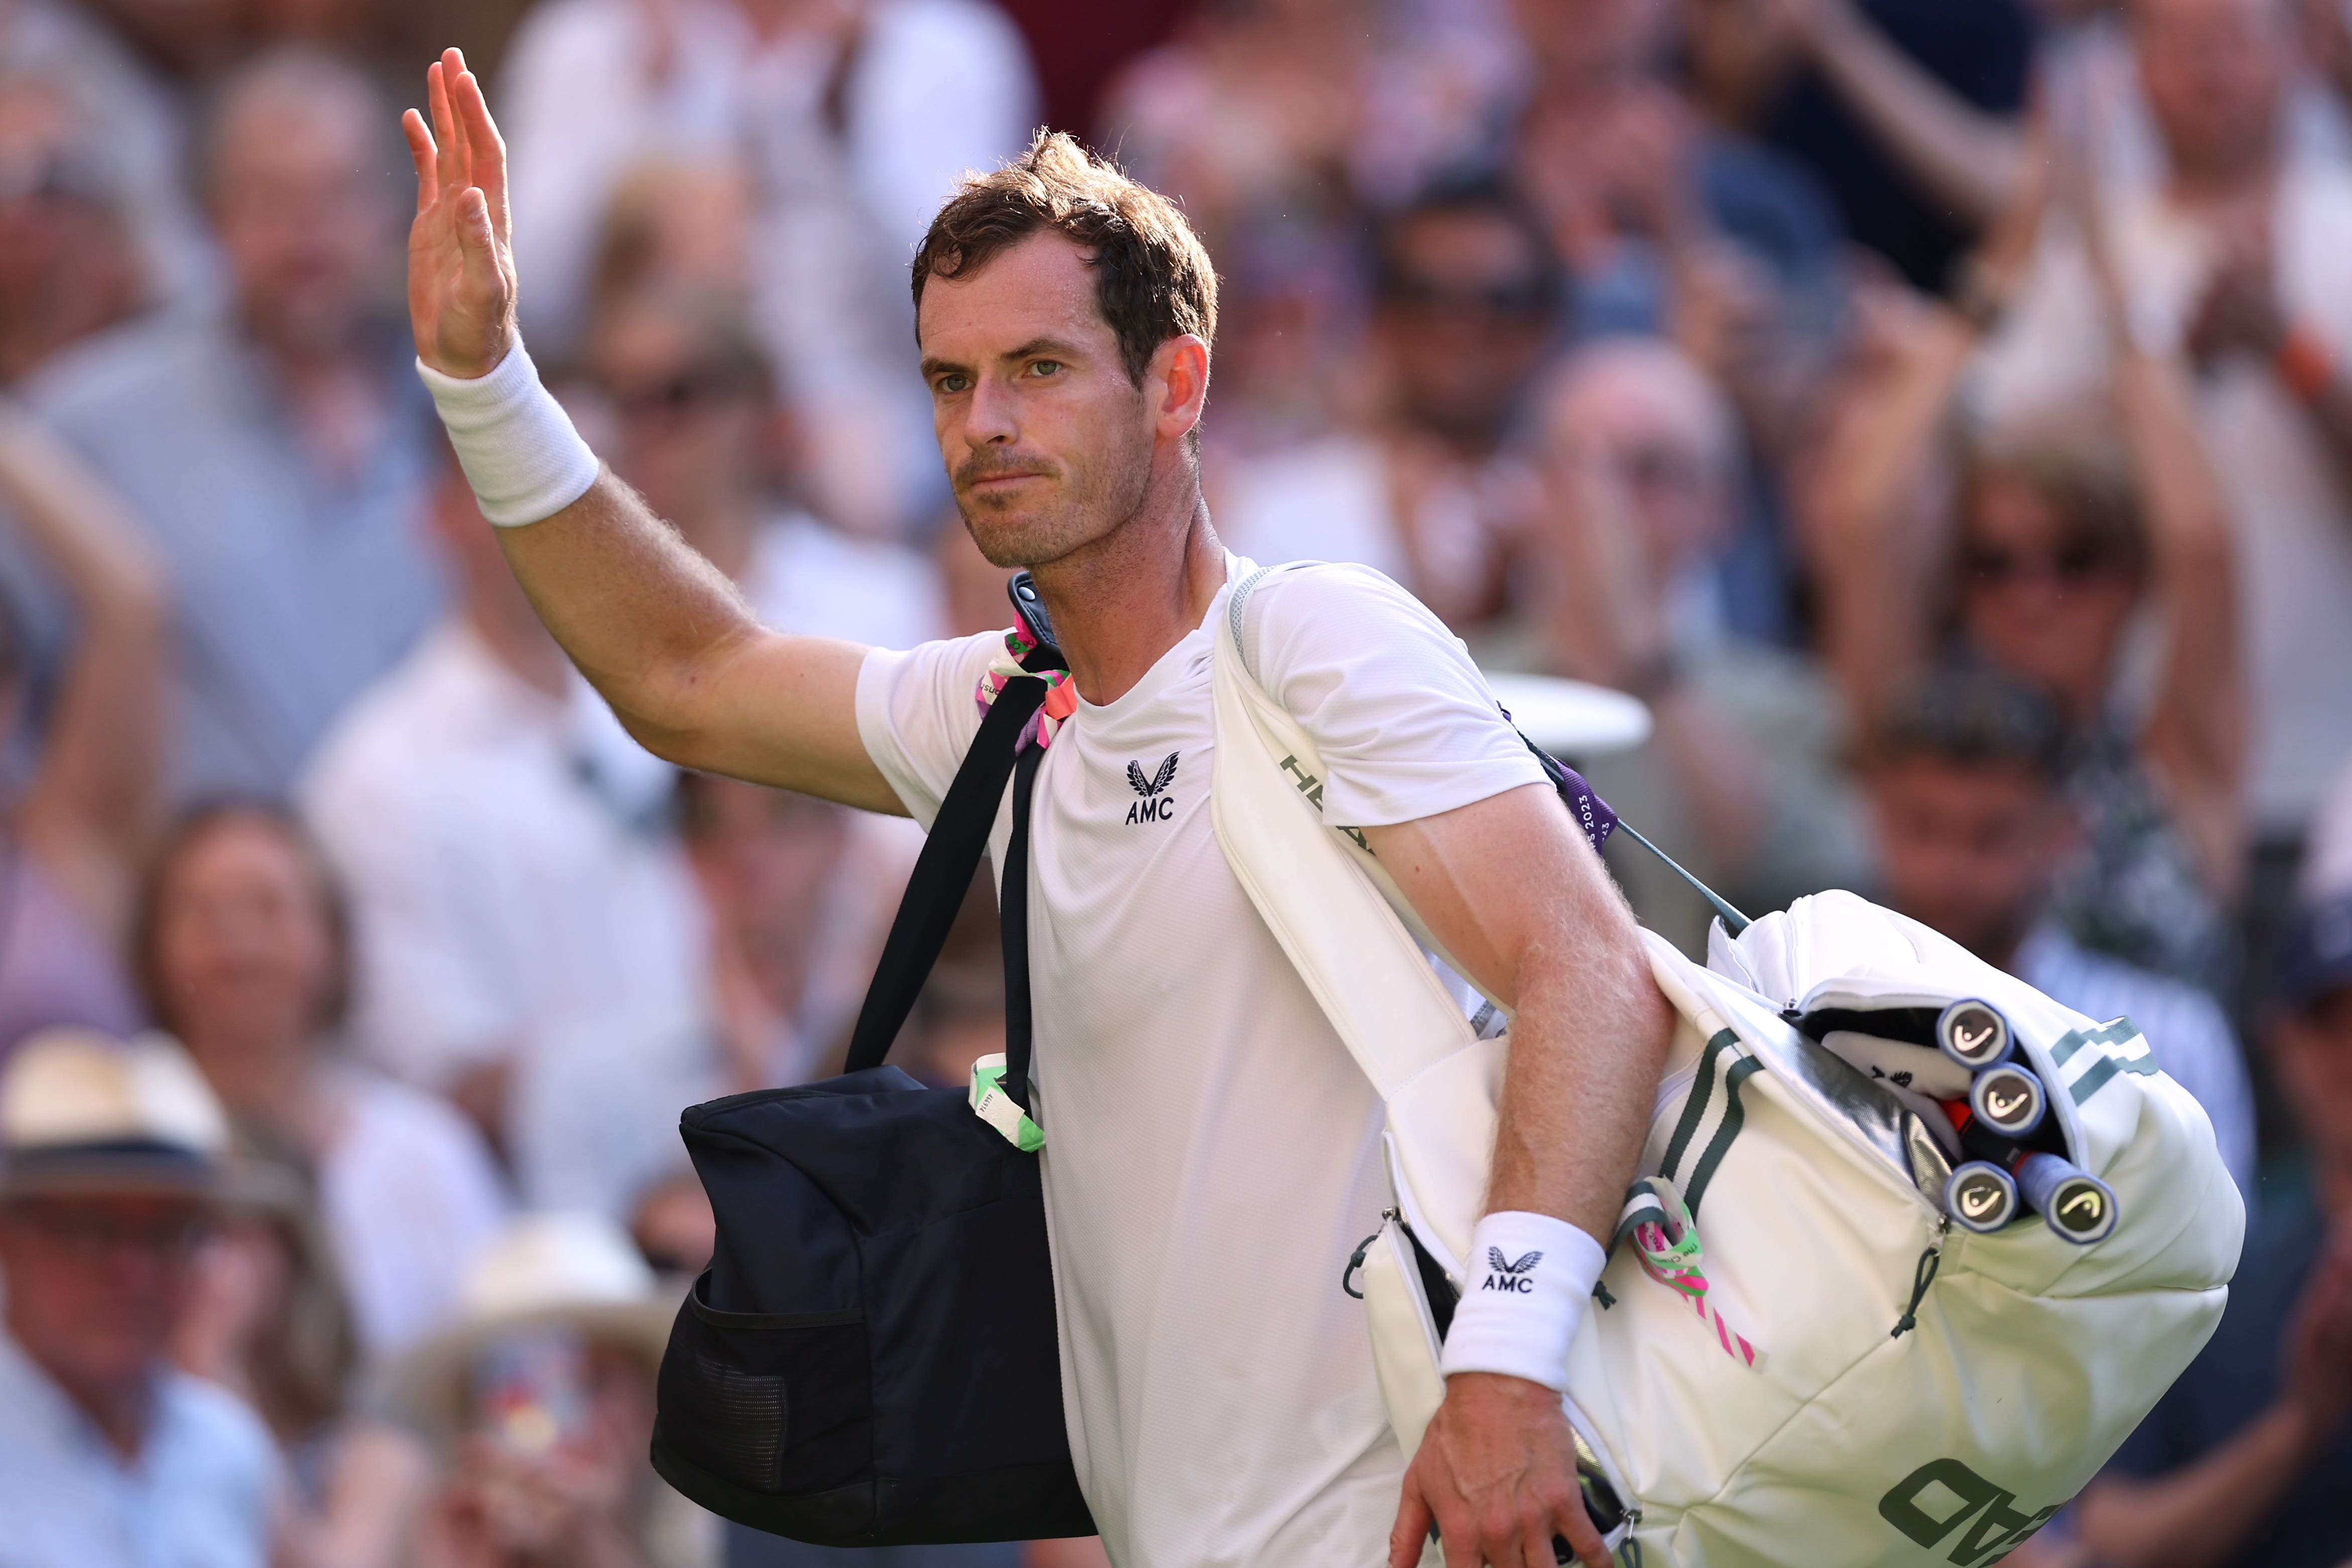 Andy Murray will be remembered as the brightest light in British tennis for decades (Steven Paston/PA)